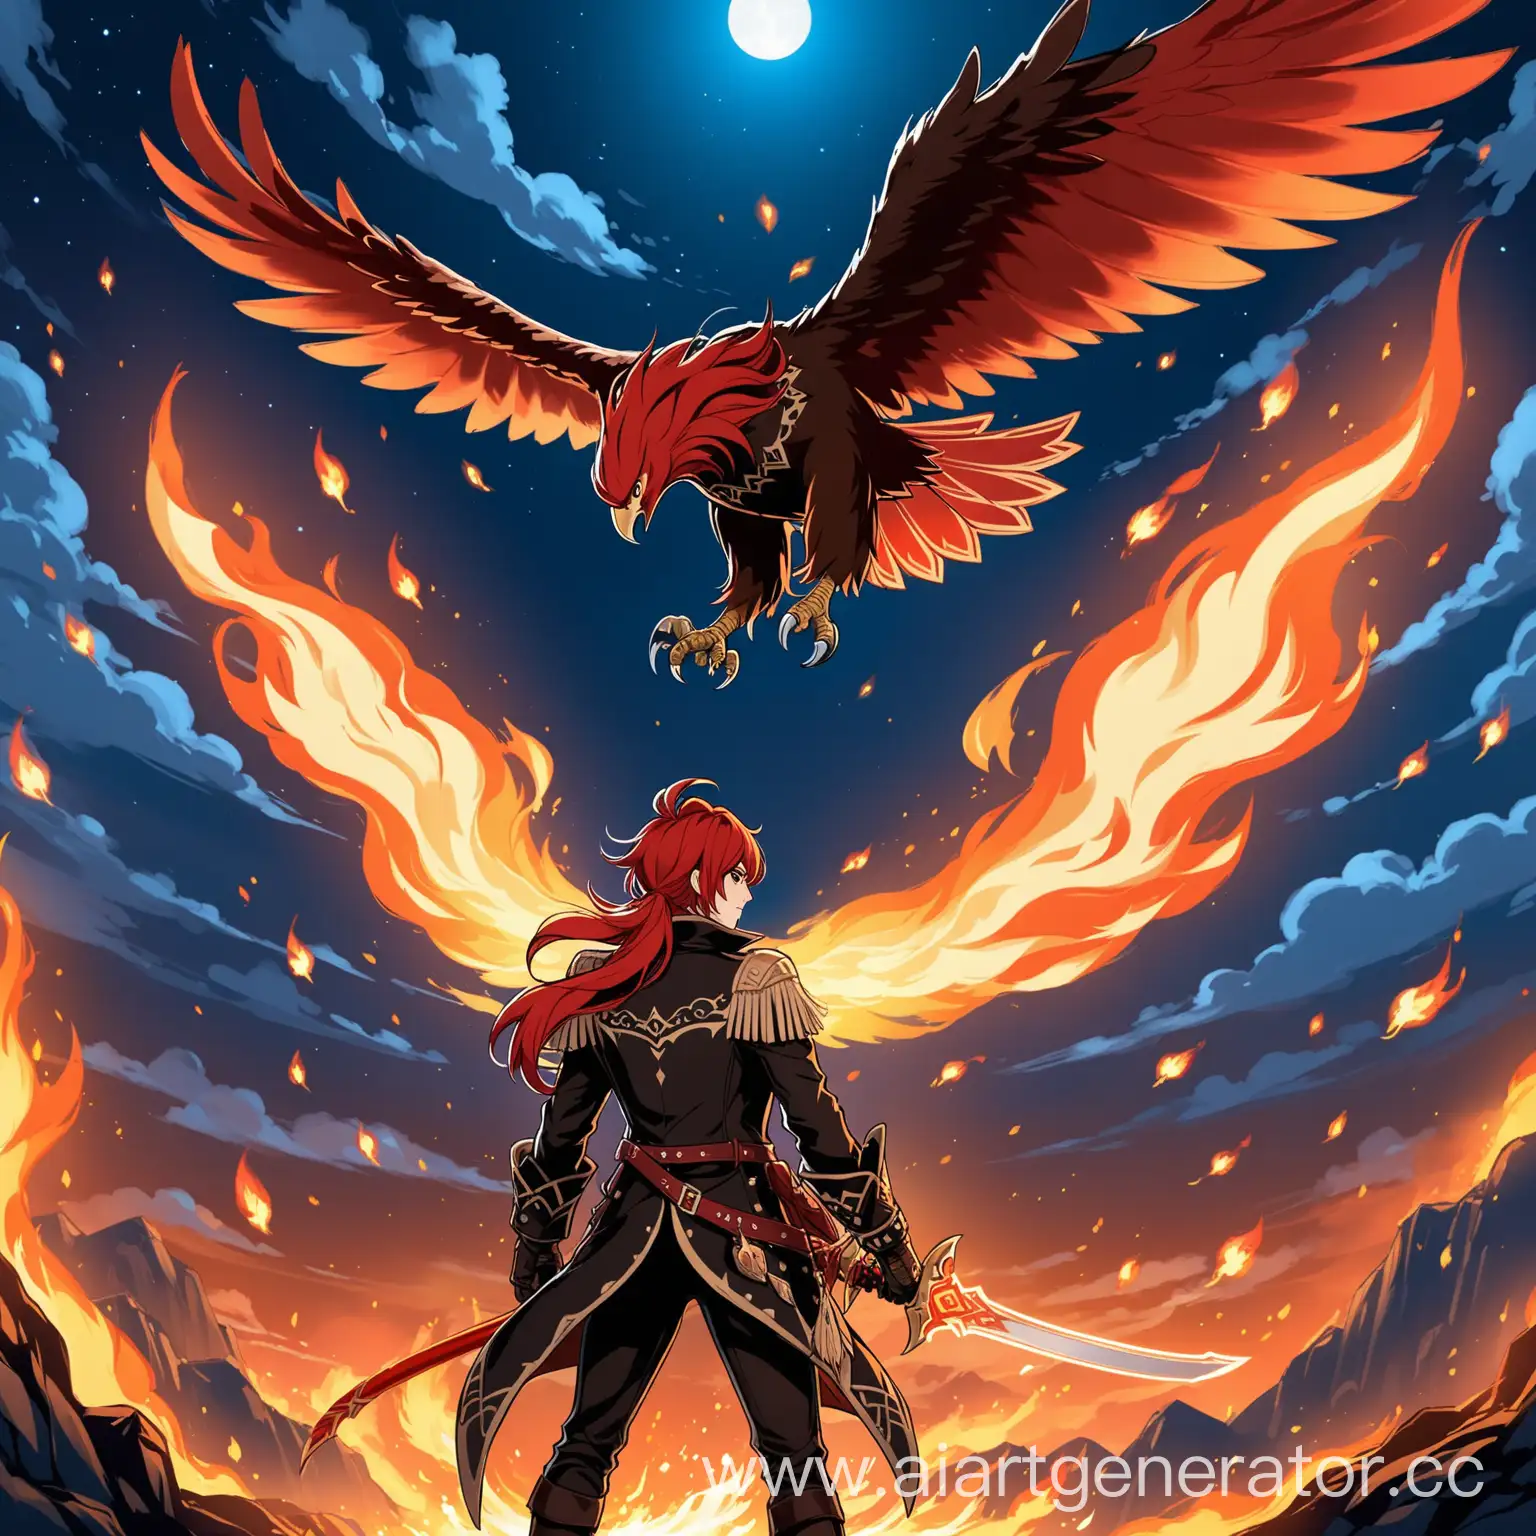 Diluc-from-Genshin-Impact-Fiery-Night-Encounter-with-Eagle